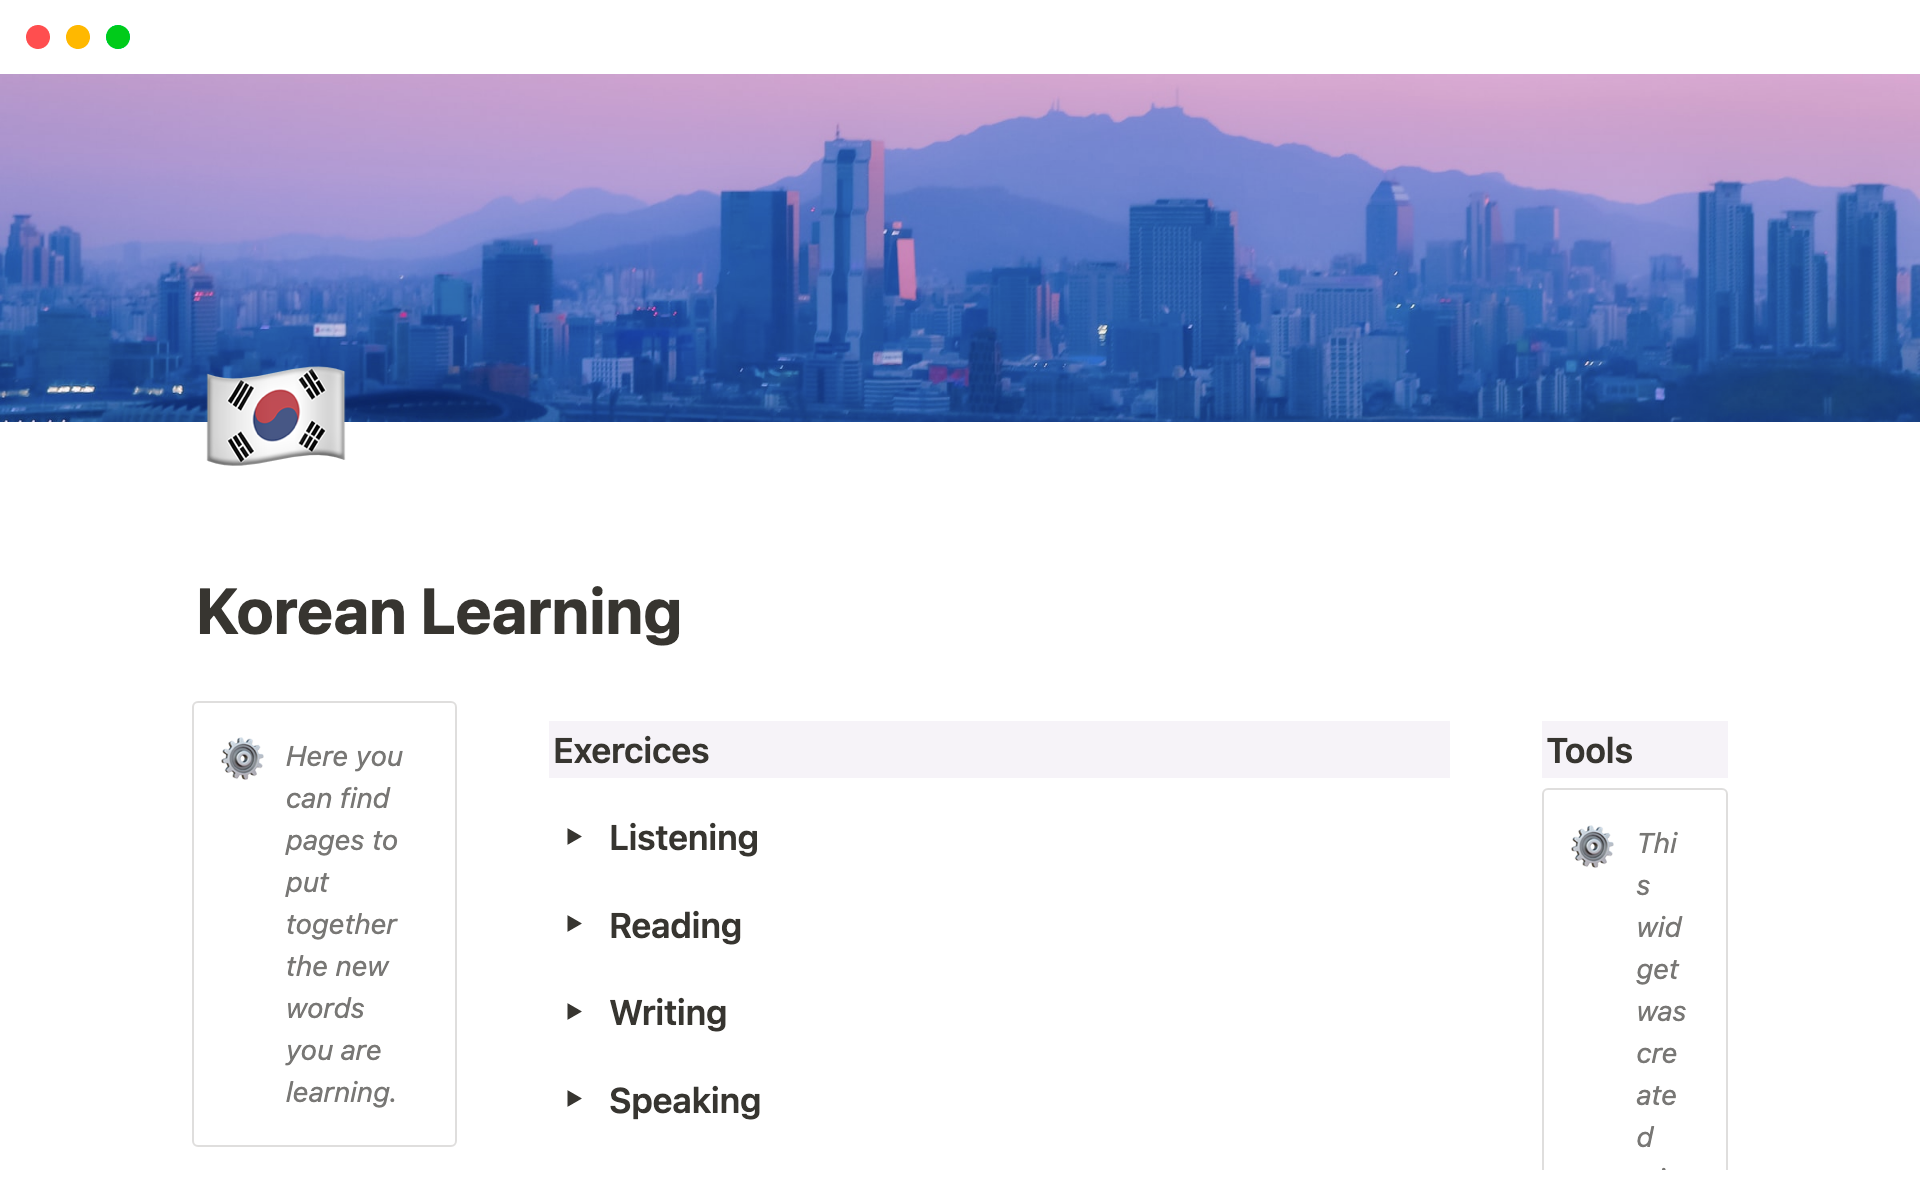 This template helps you to set goals and tasks for an enjoyable Korean learning.